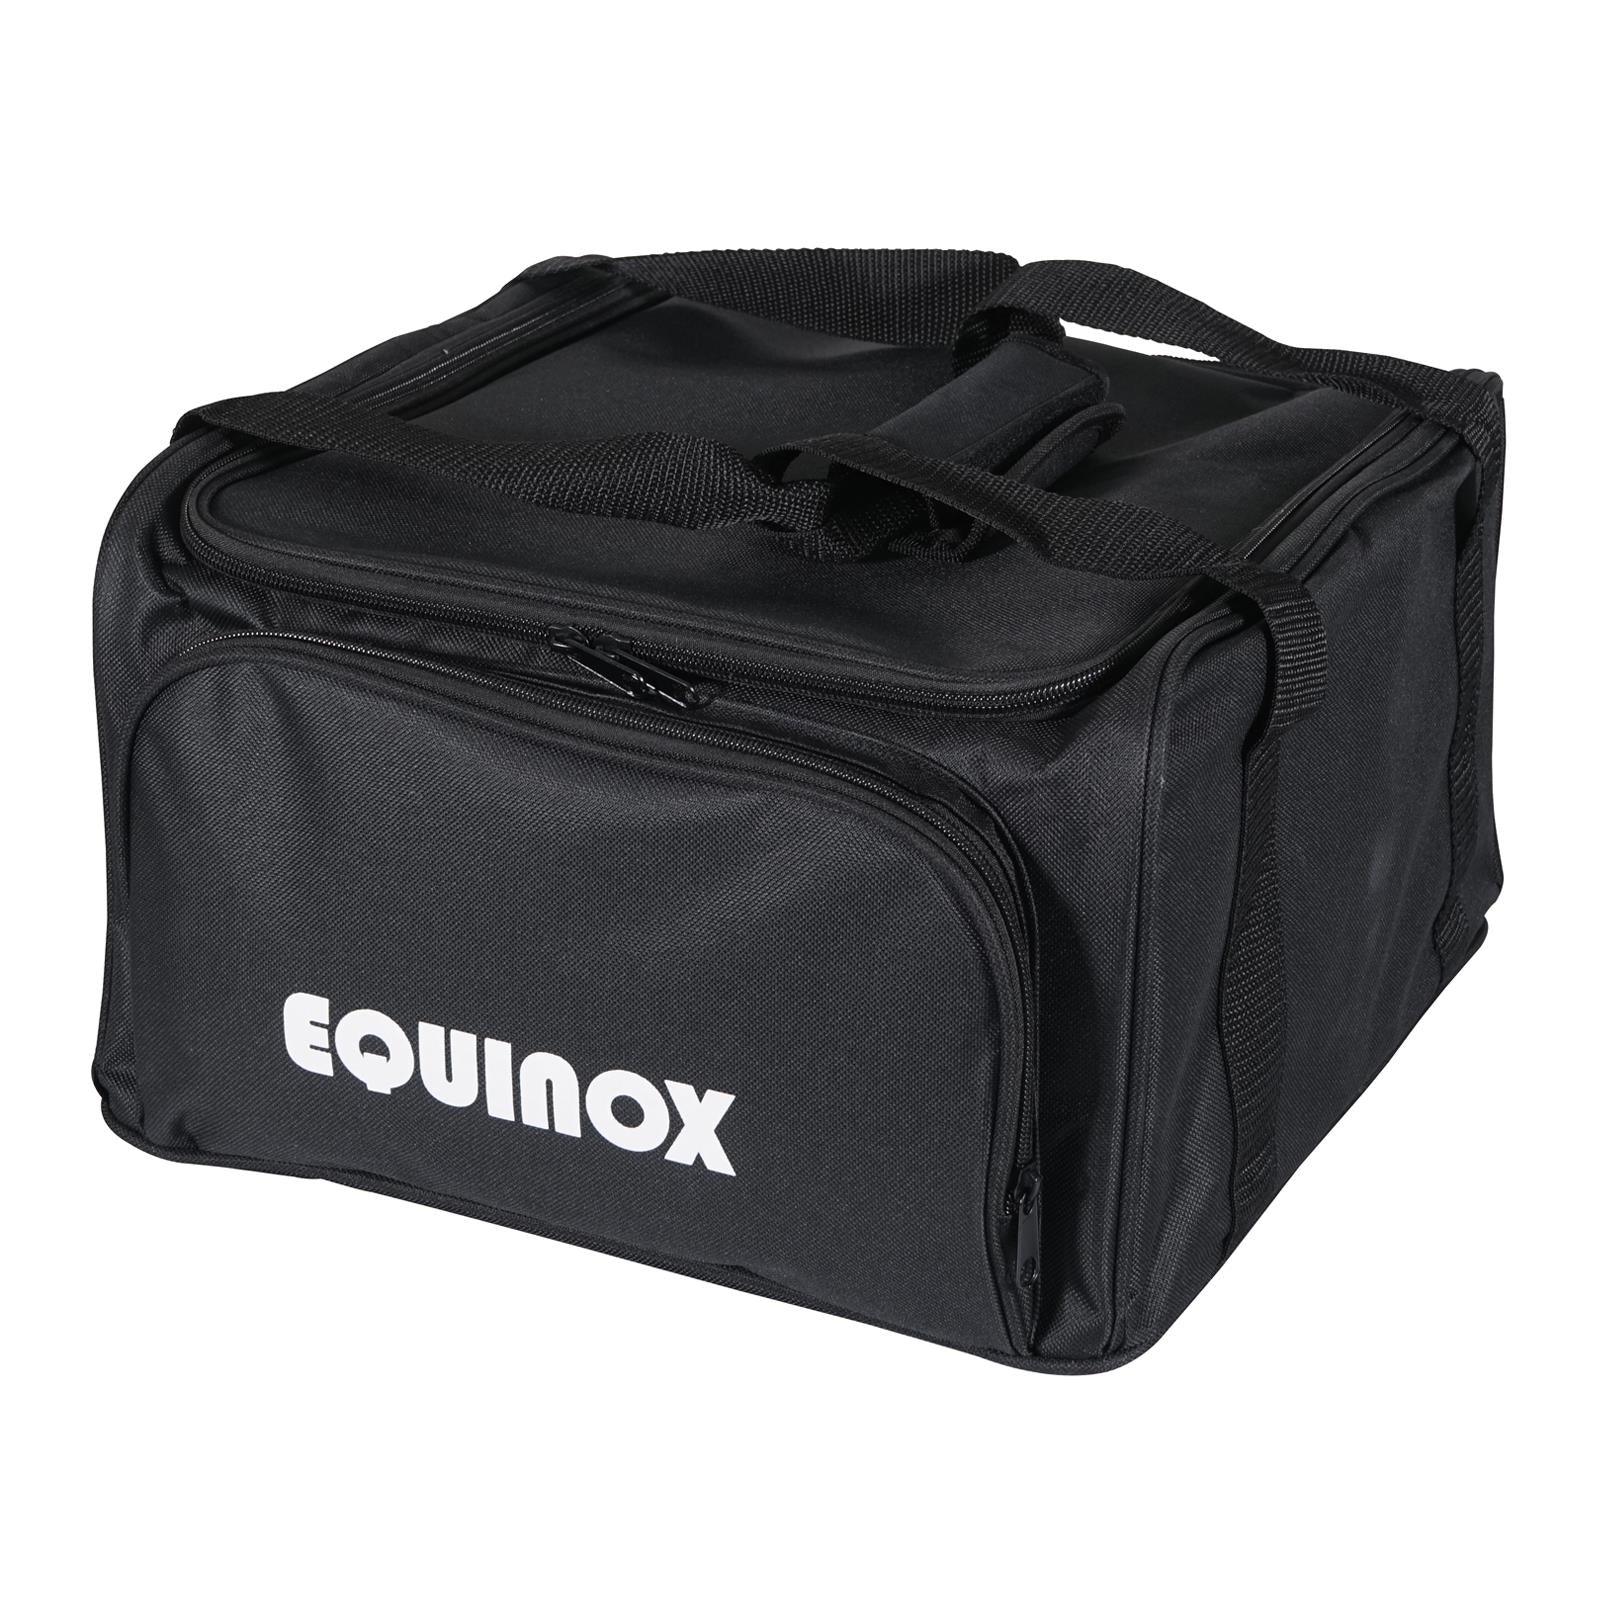 Equinox Colour Raider Lithium Battery Uplighter Pack Replacement Bag - DY Pro Audio